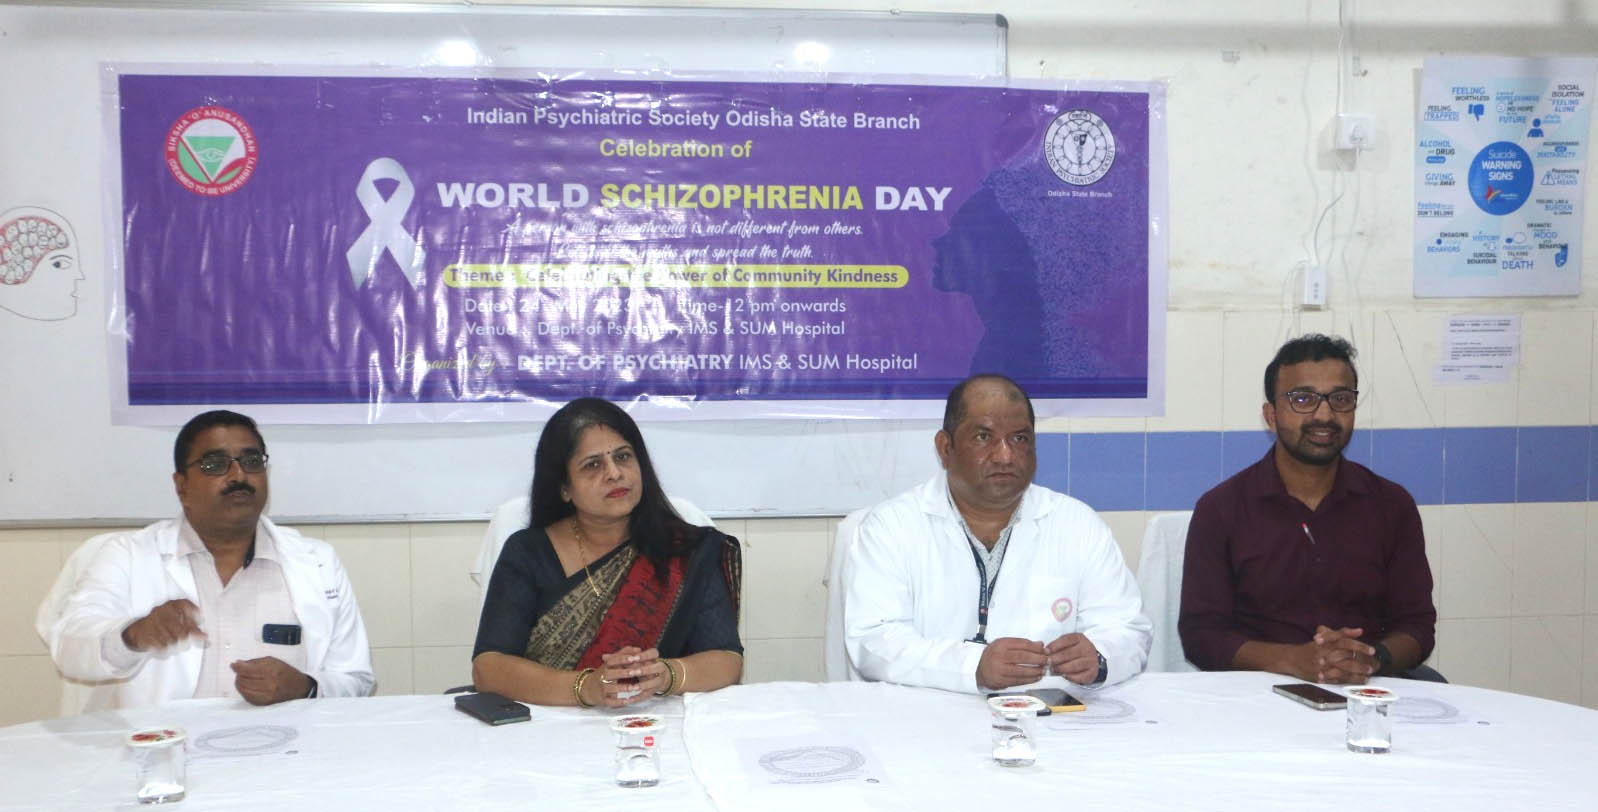 PEOPLE NEED TO BE EDUCATED ABOUT SCHIZOPHRENIA: EXPERTS